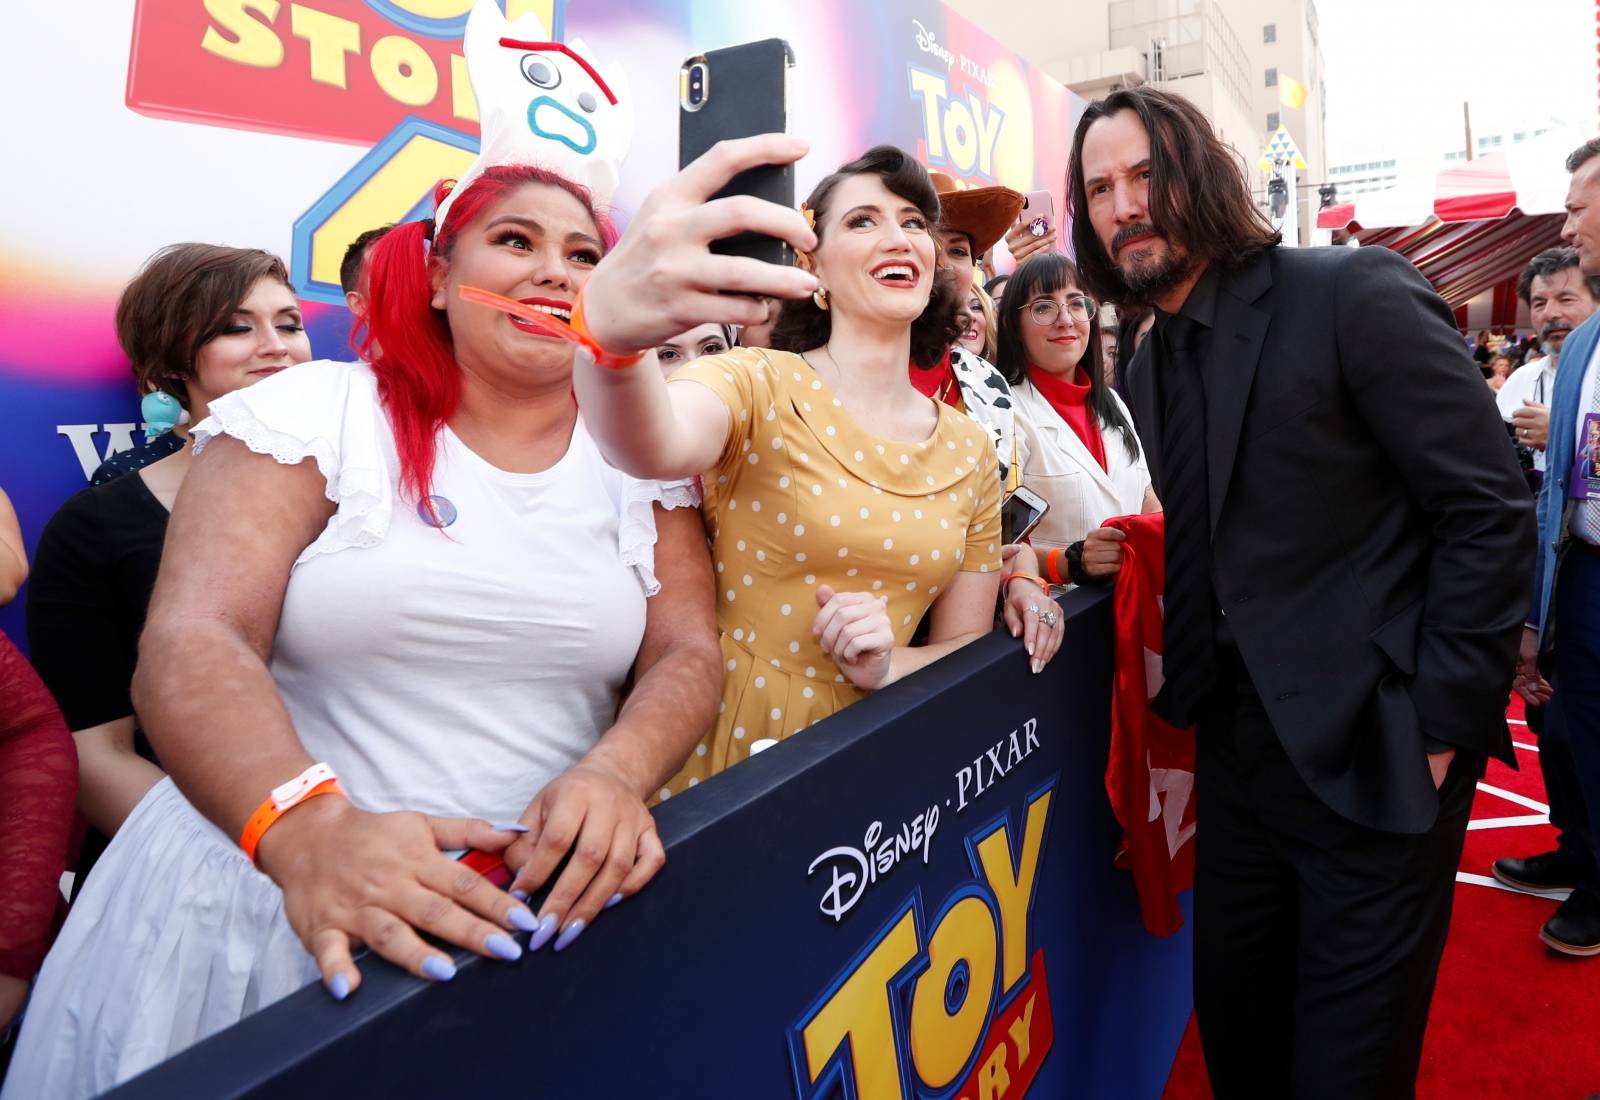 Premiere for "Toy Story 4" in Los Angeles, California